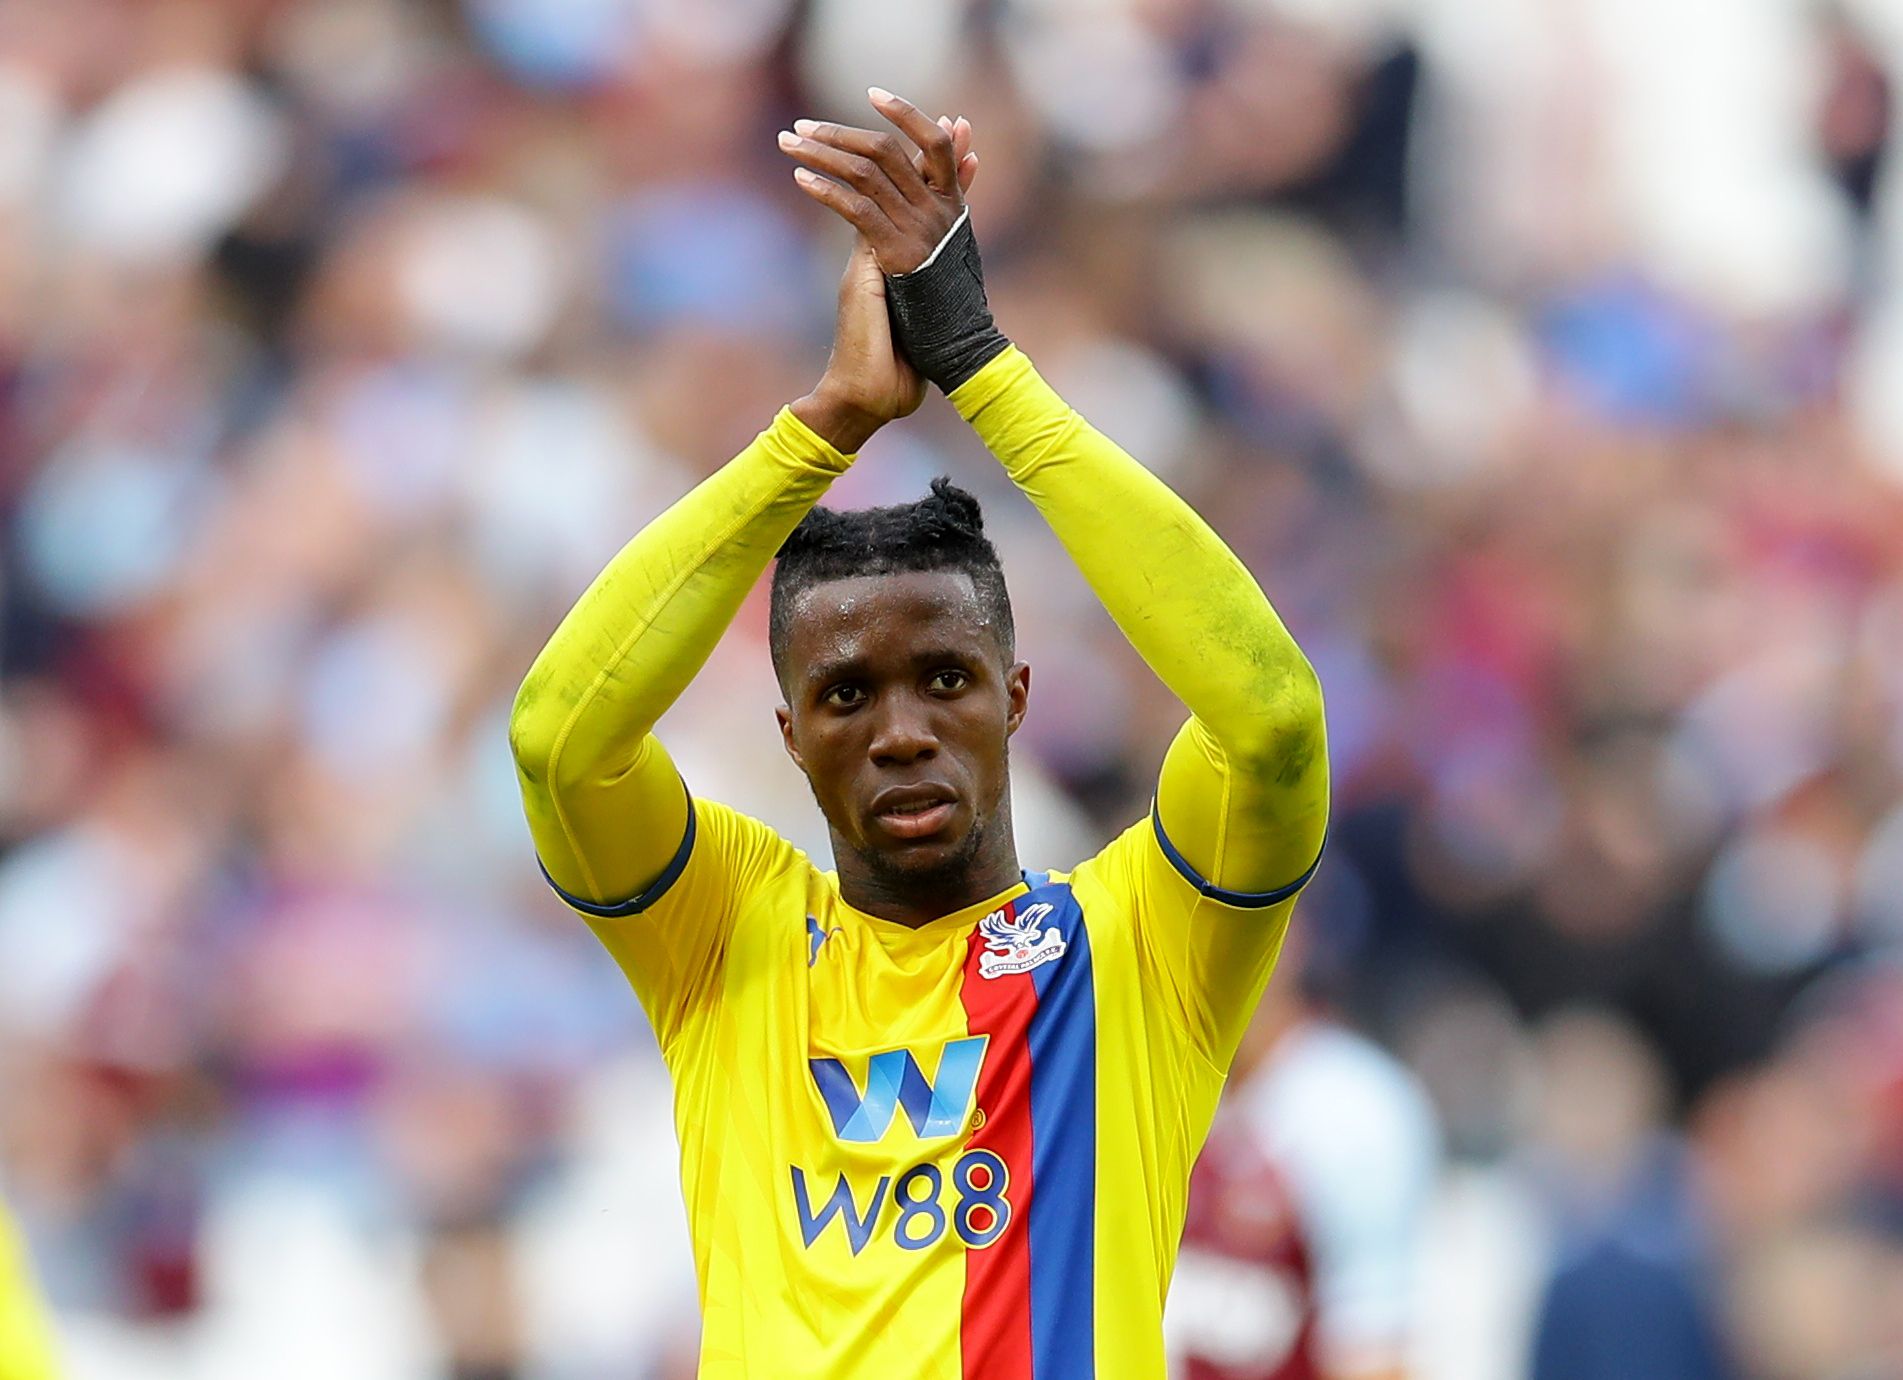 Soccer Football - Premier League - West Ham United v Crystal Palace - London Stadium, London, Britain - August 28, 2021 Crystal Palace's Wilfried Zaha applauds fans after the match REUTERS/David Klein EDITORIAL USE ONLY. No use with unauthorized audio, video, data, fixture lists, club/league logos or 'live' services. Online in-match use limited to 75 images, no video emulation. No use in betting, games or single club /league/player publications.  Please contact your account representative for fu